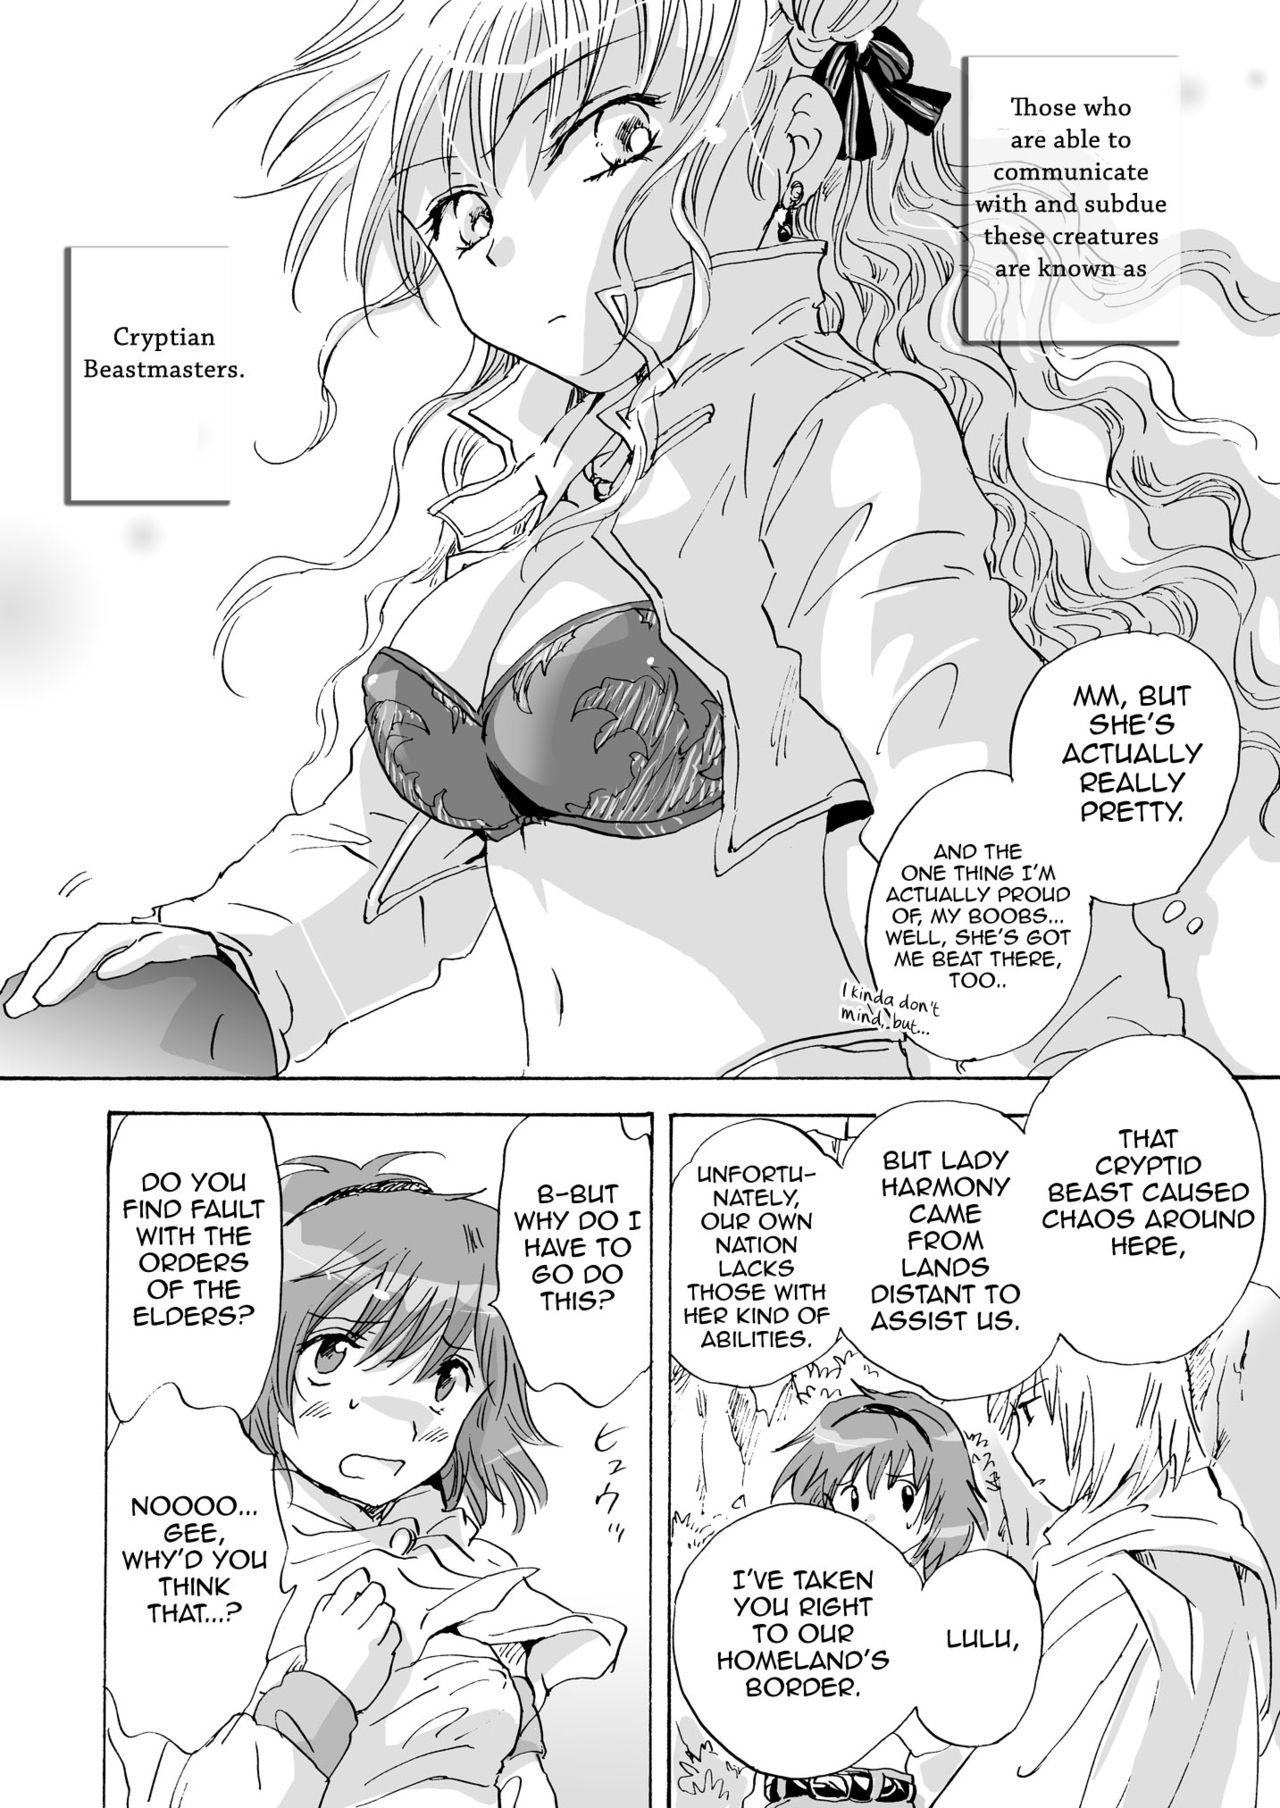 Spoon Cutie Beast Complete Edition Ch. 1-6 She - Page 7